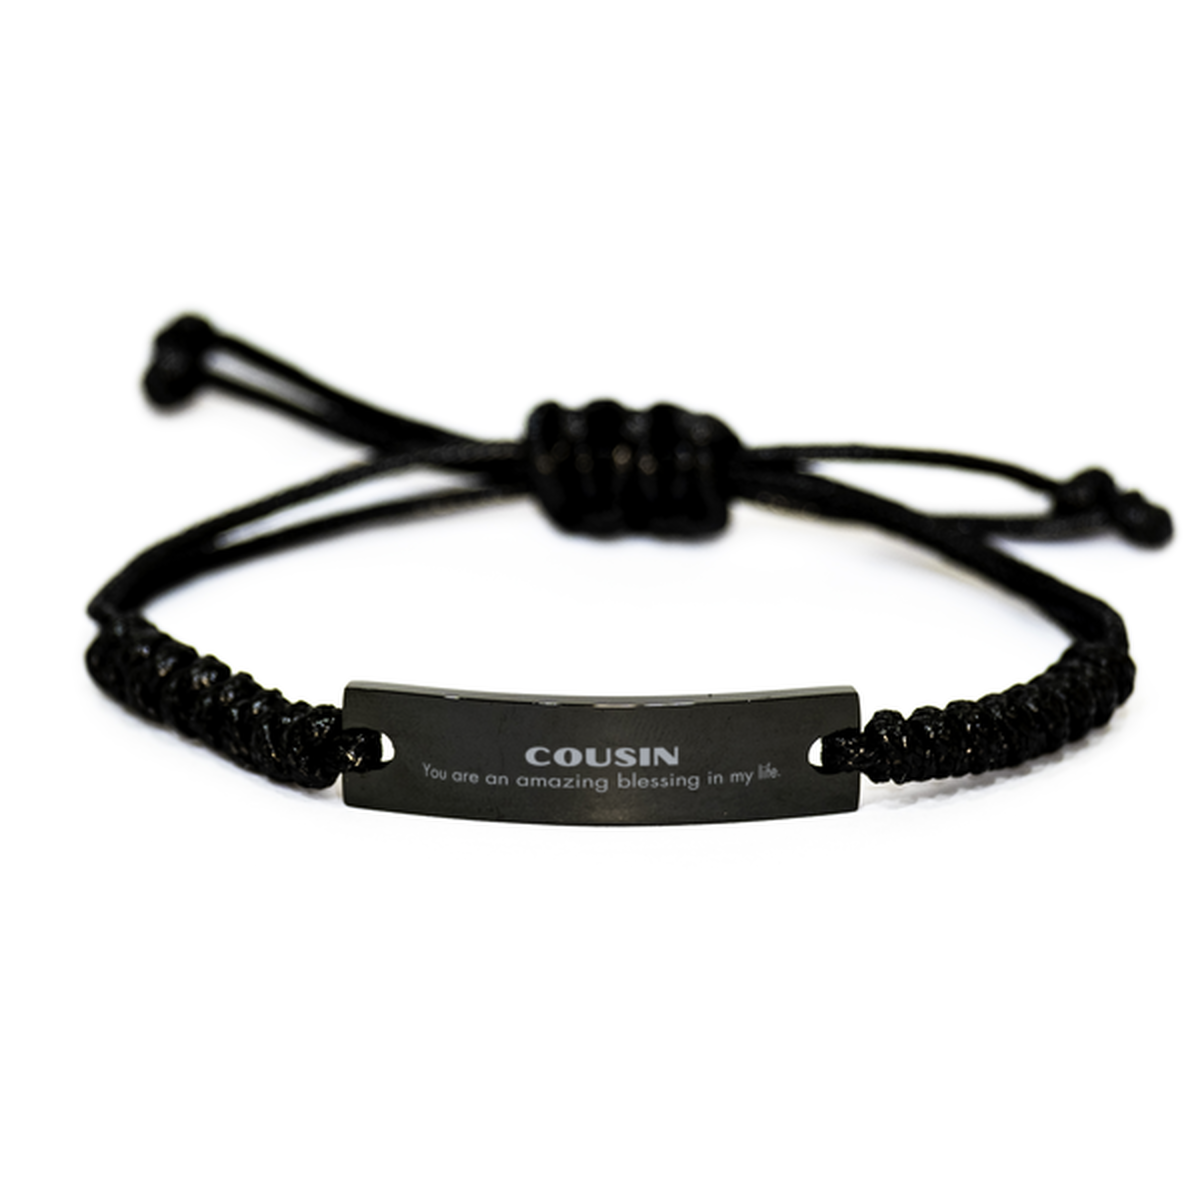 Cousin Black Rope Bracelet, You are an amazing blessing in my life, Thank You Gifts For Cousin, Inspirational Birthday Christmas Unique Gifts For Cousin